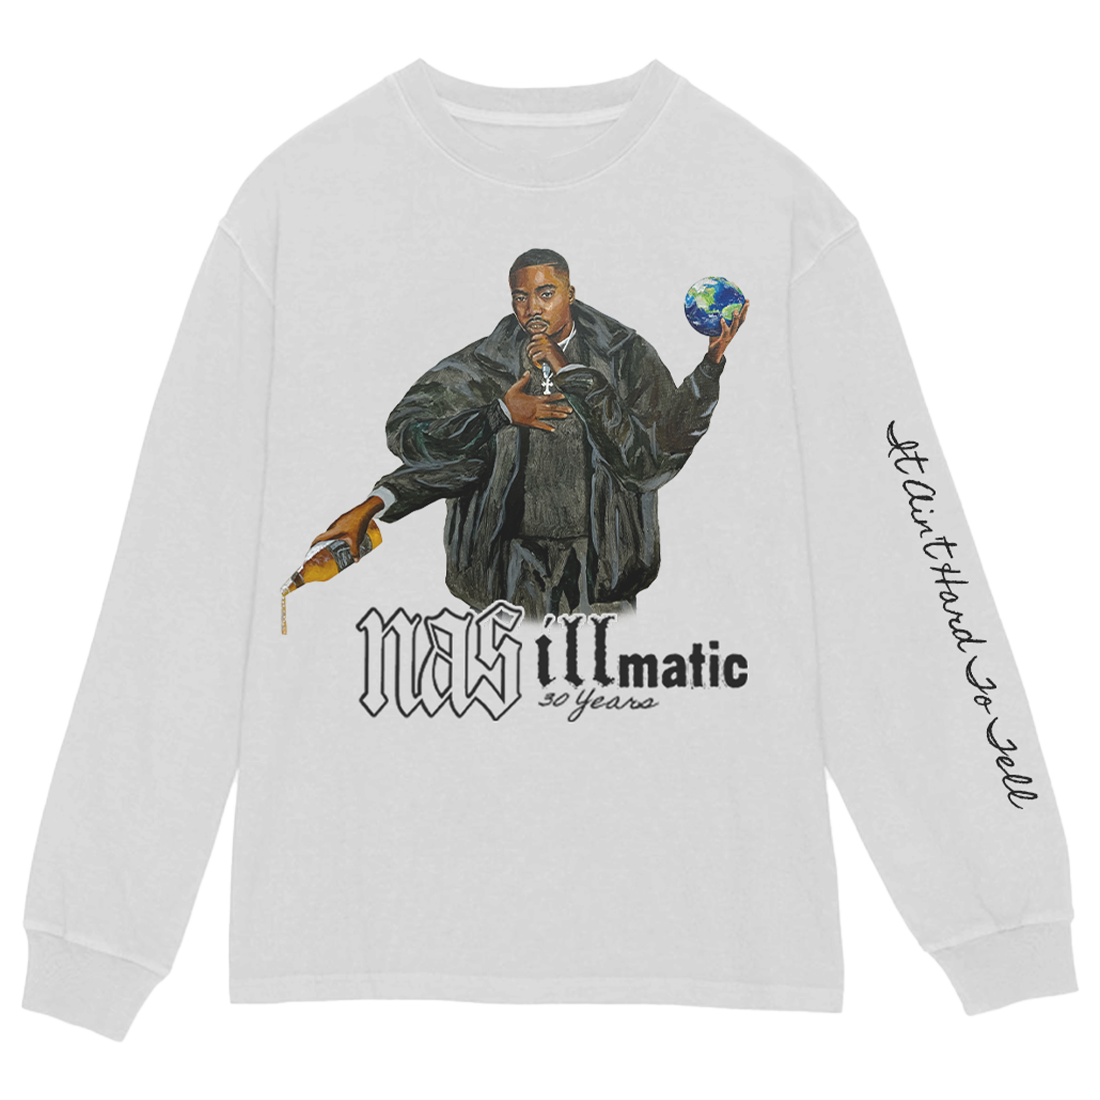 Graphic tee with &quot;Nas Illmatic 25 Years&quot; text and illustration of Nas holding a microphone and globe